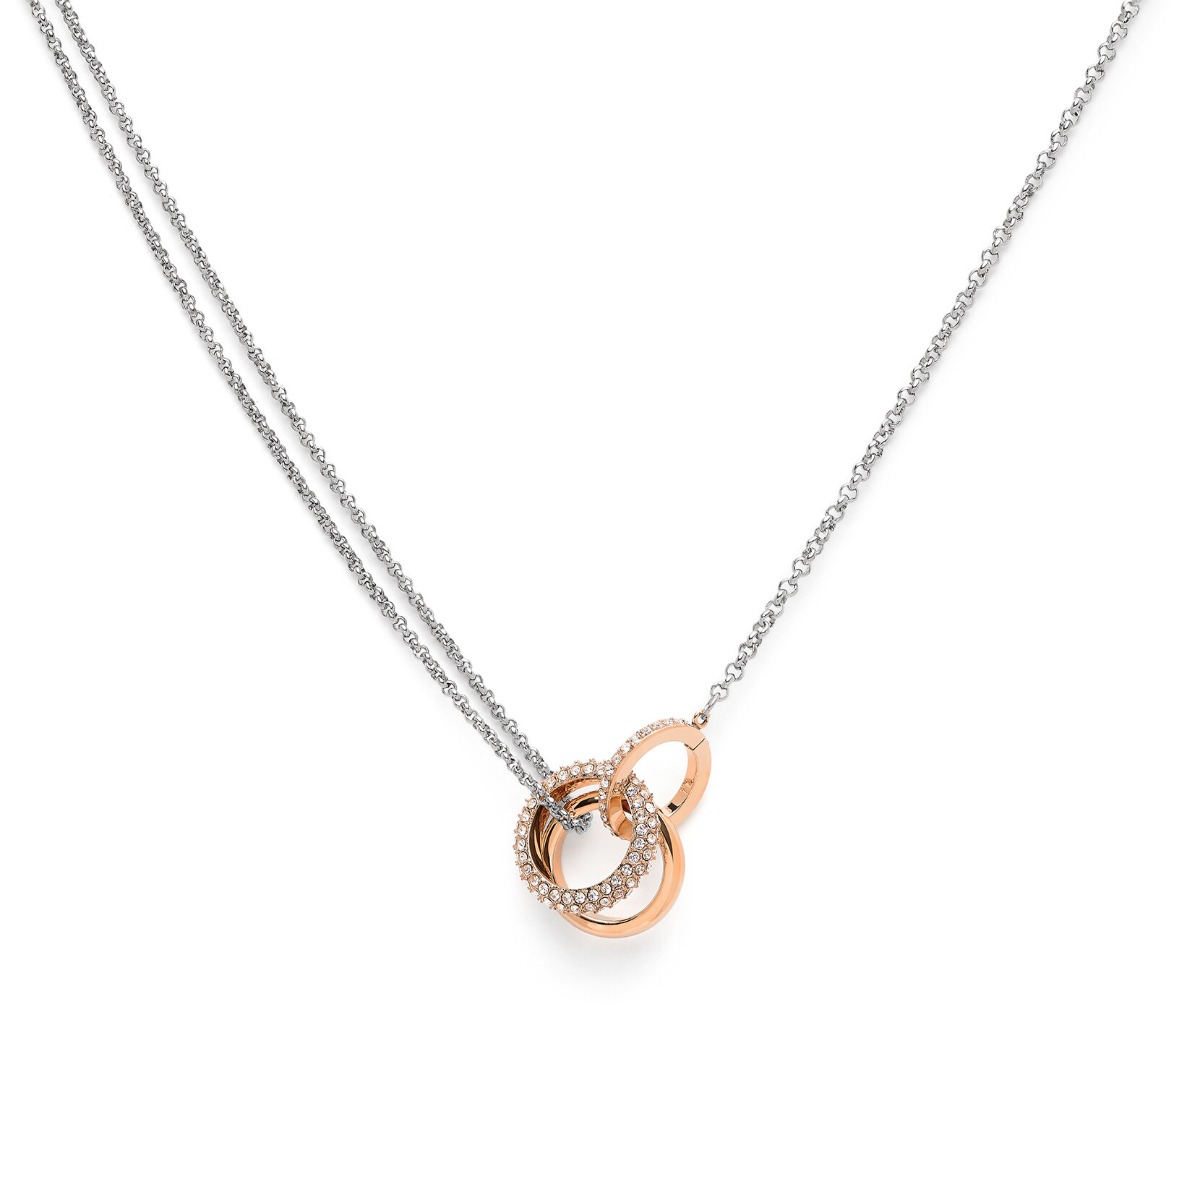 Olivia Burton Entwine Silver and Rose Gold Necklace